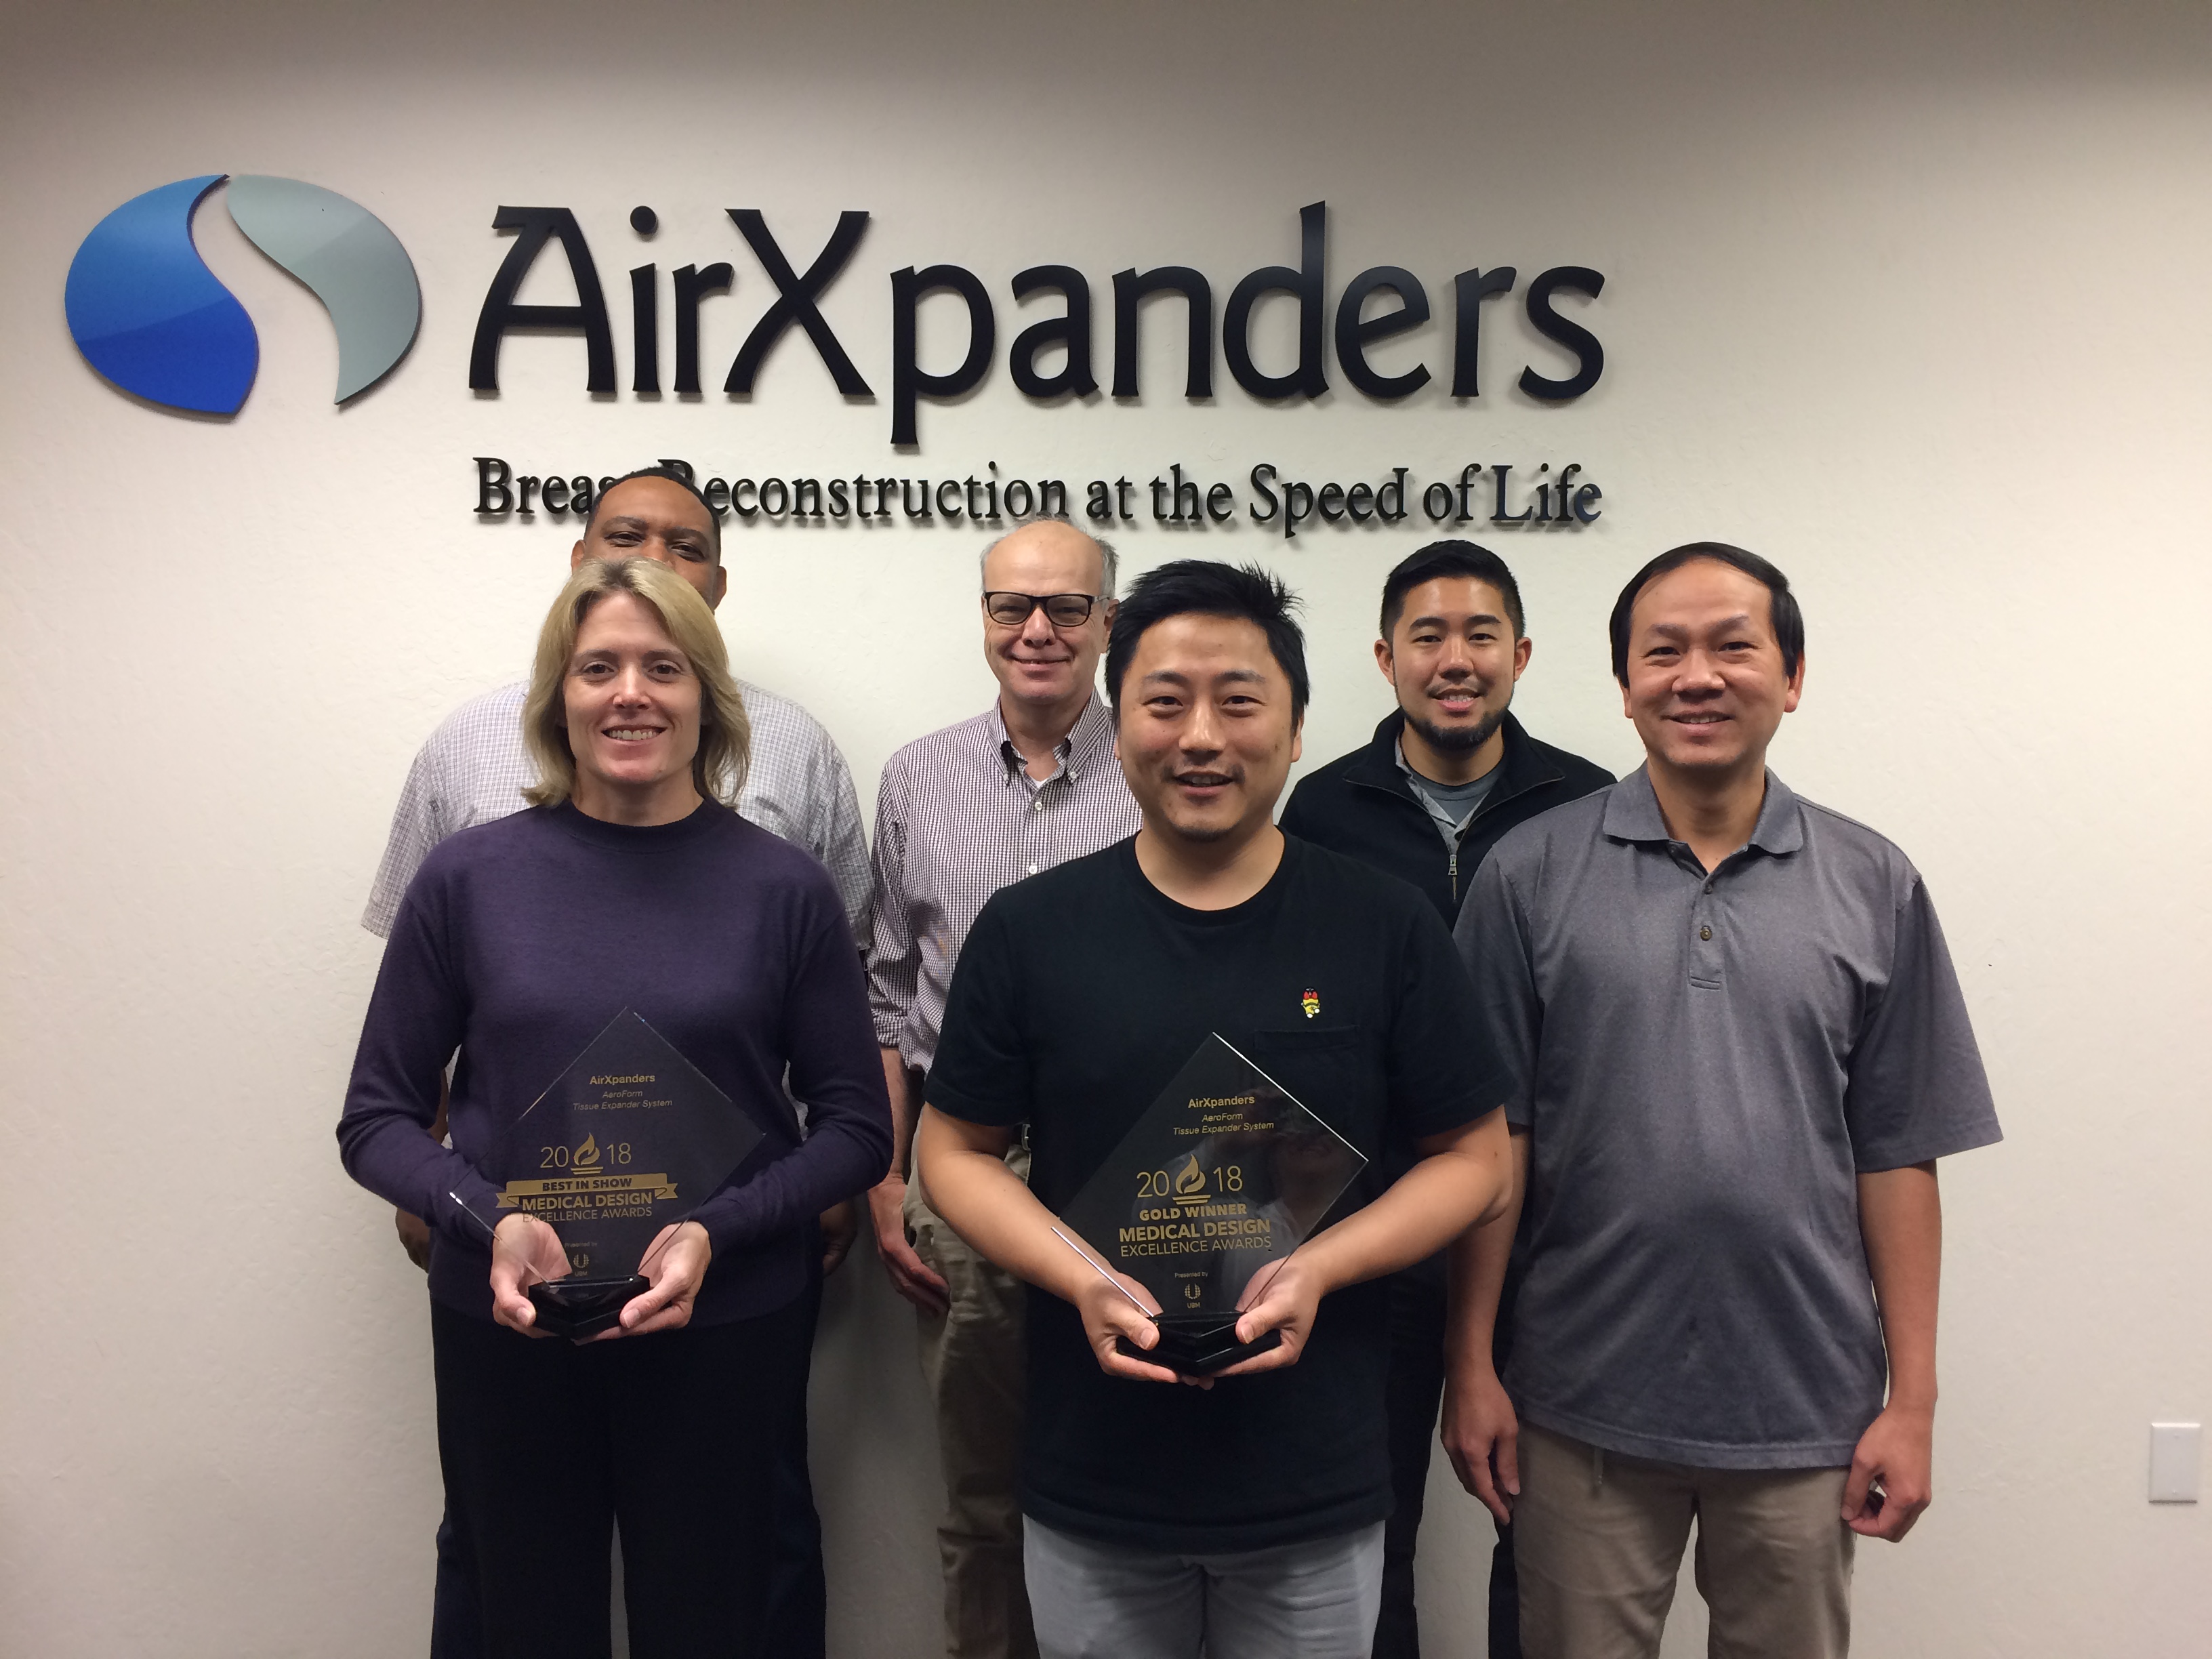 AirXpanders, Inc. Wins the Medical Design Excellence Award